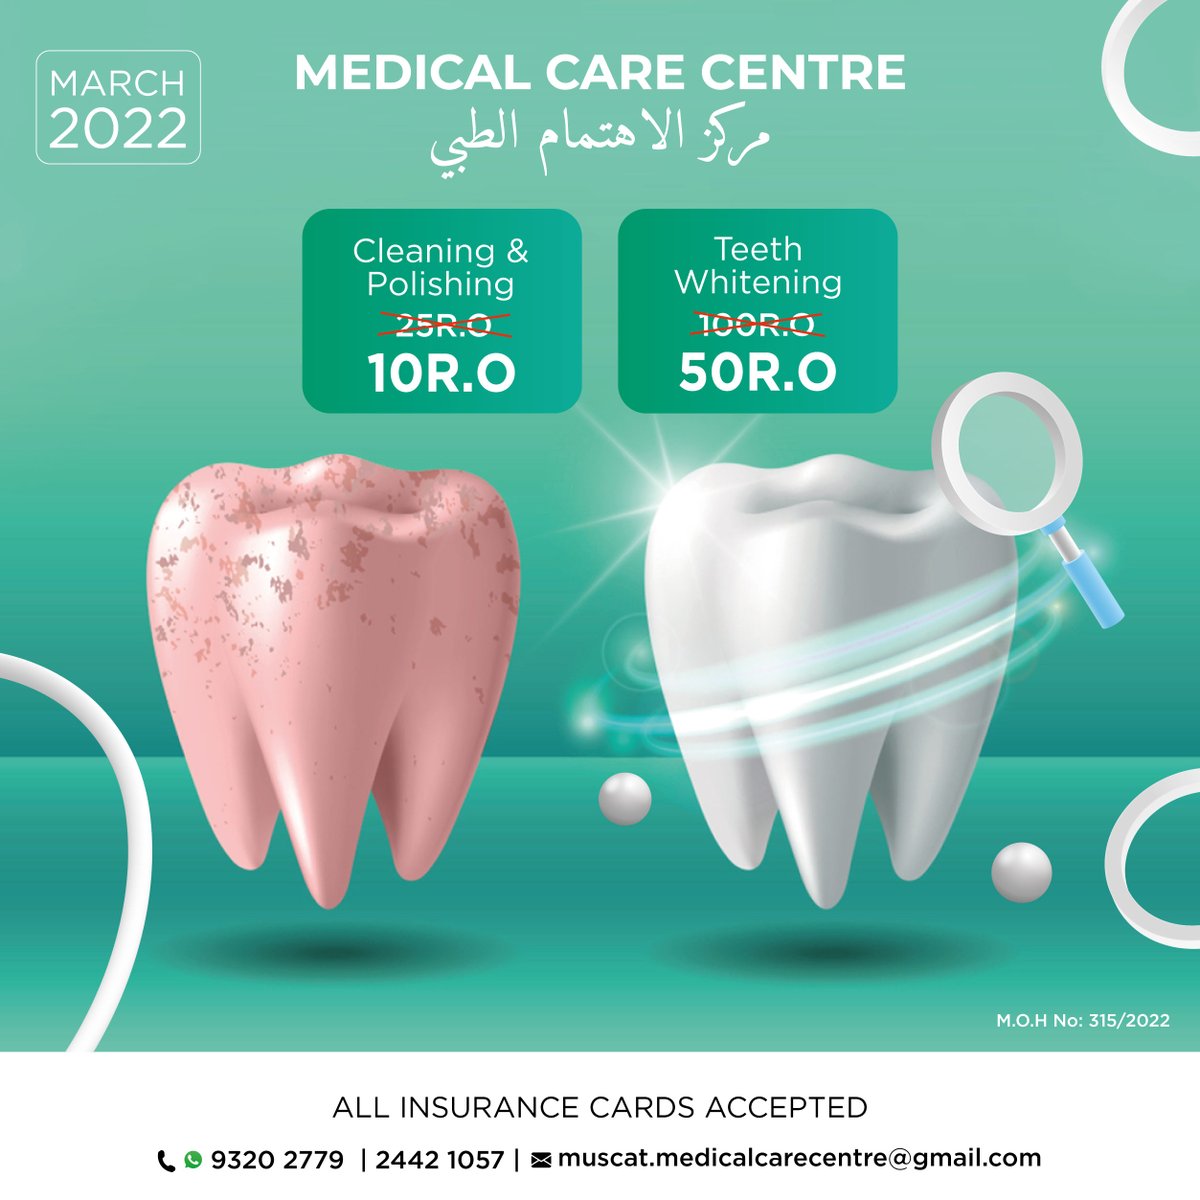 Cleaning, polishing and teeth whitening are now at very affordable prices. Providing the optimum care!

#healthservices #muscat #oman #dental #dentist #teeth #dentalcare #dentalclinic #orthodontics #oralhealth #dentalhygiene #teethwhitening #smilemakeover #physician #doctor https://t.co/inU0NhNc2W